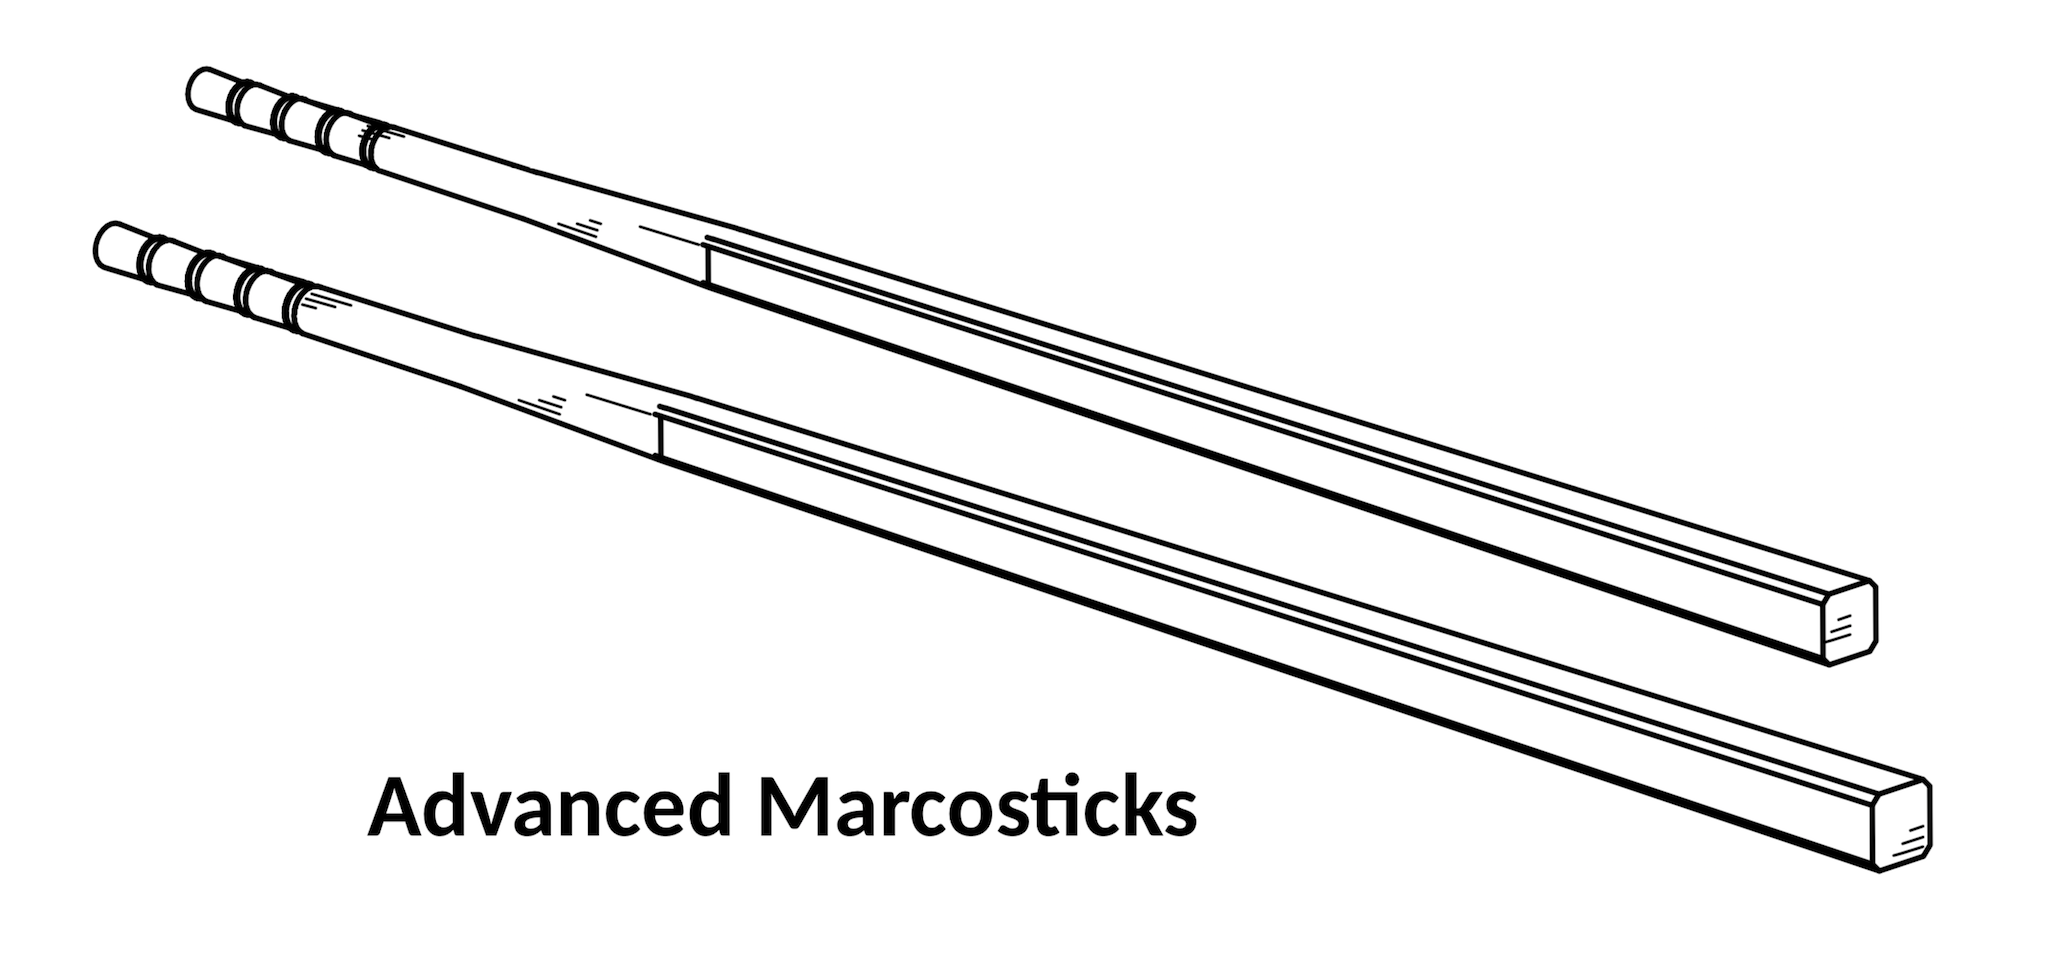 You are currently viewing Model A: Advanced Marcosticks